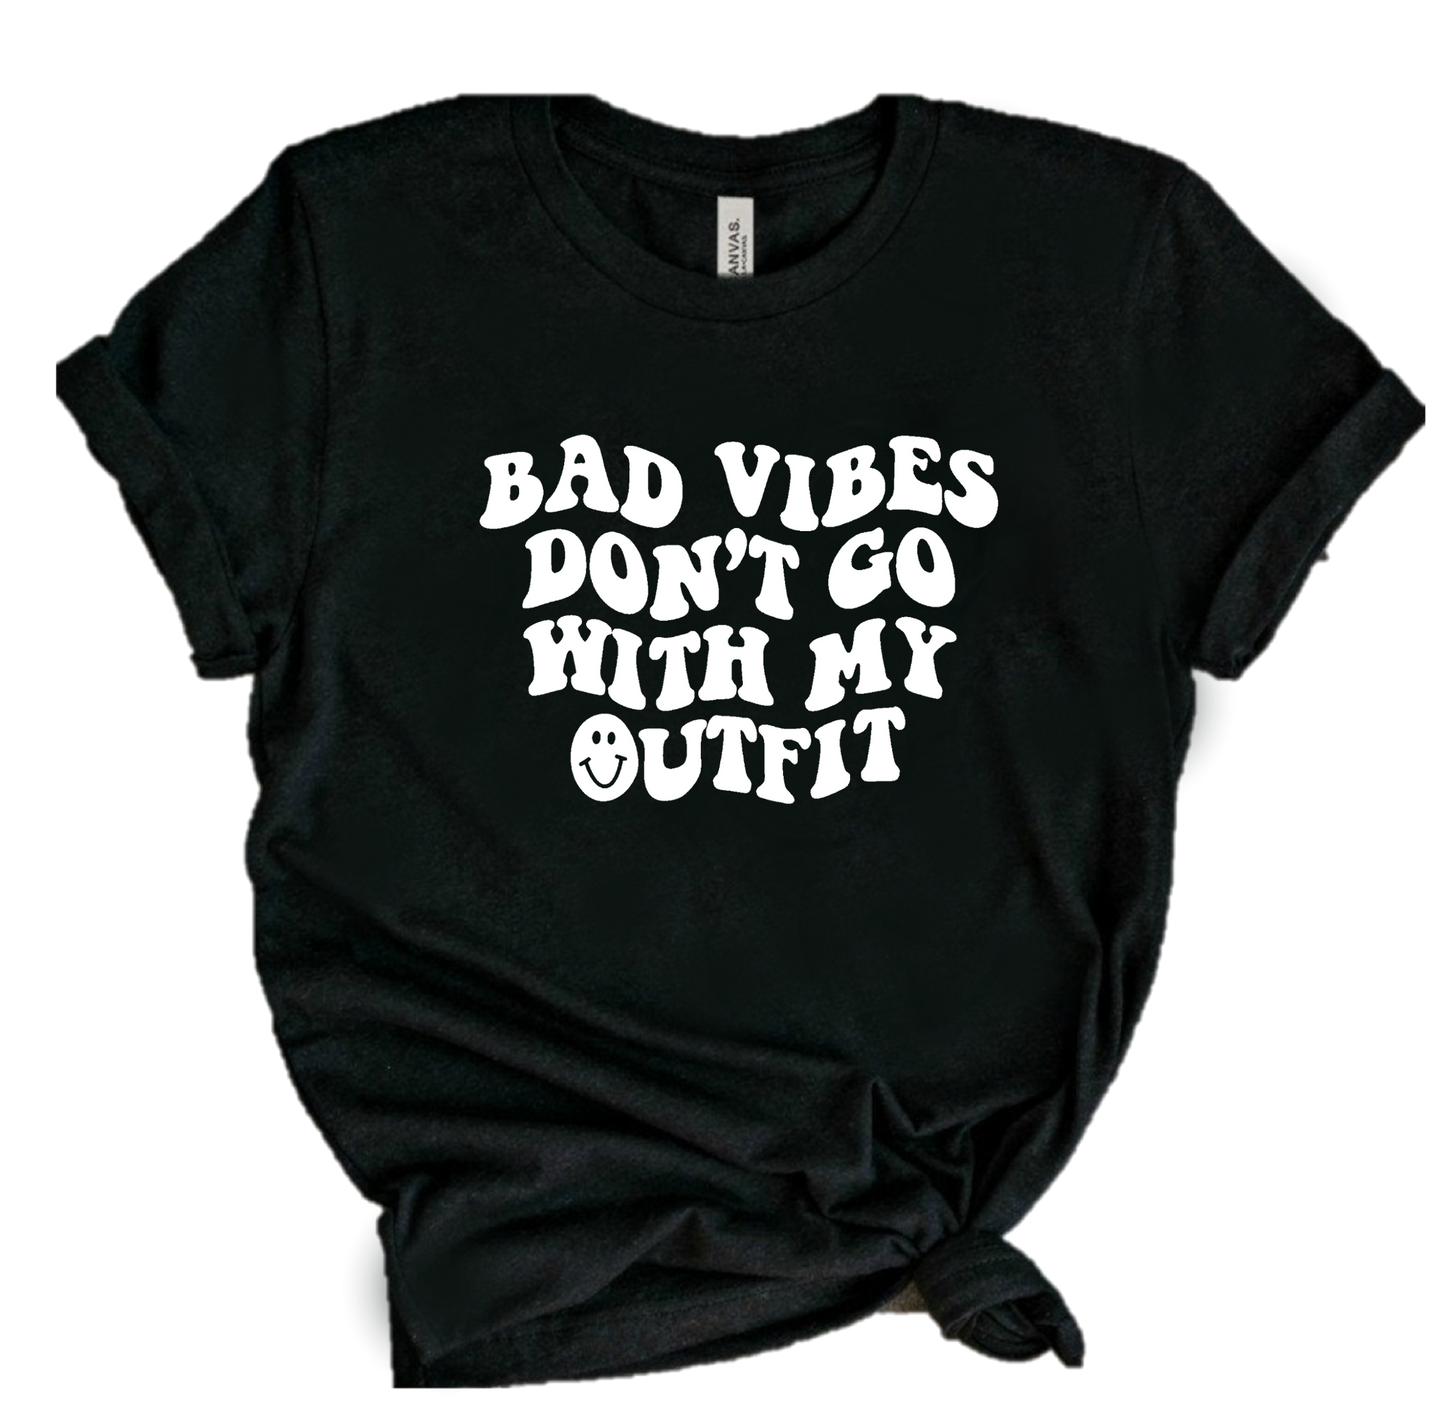 BAD VIBES DON'T GO WITH MY OUTFIT